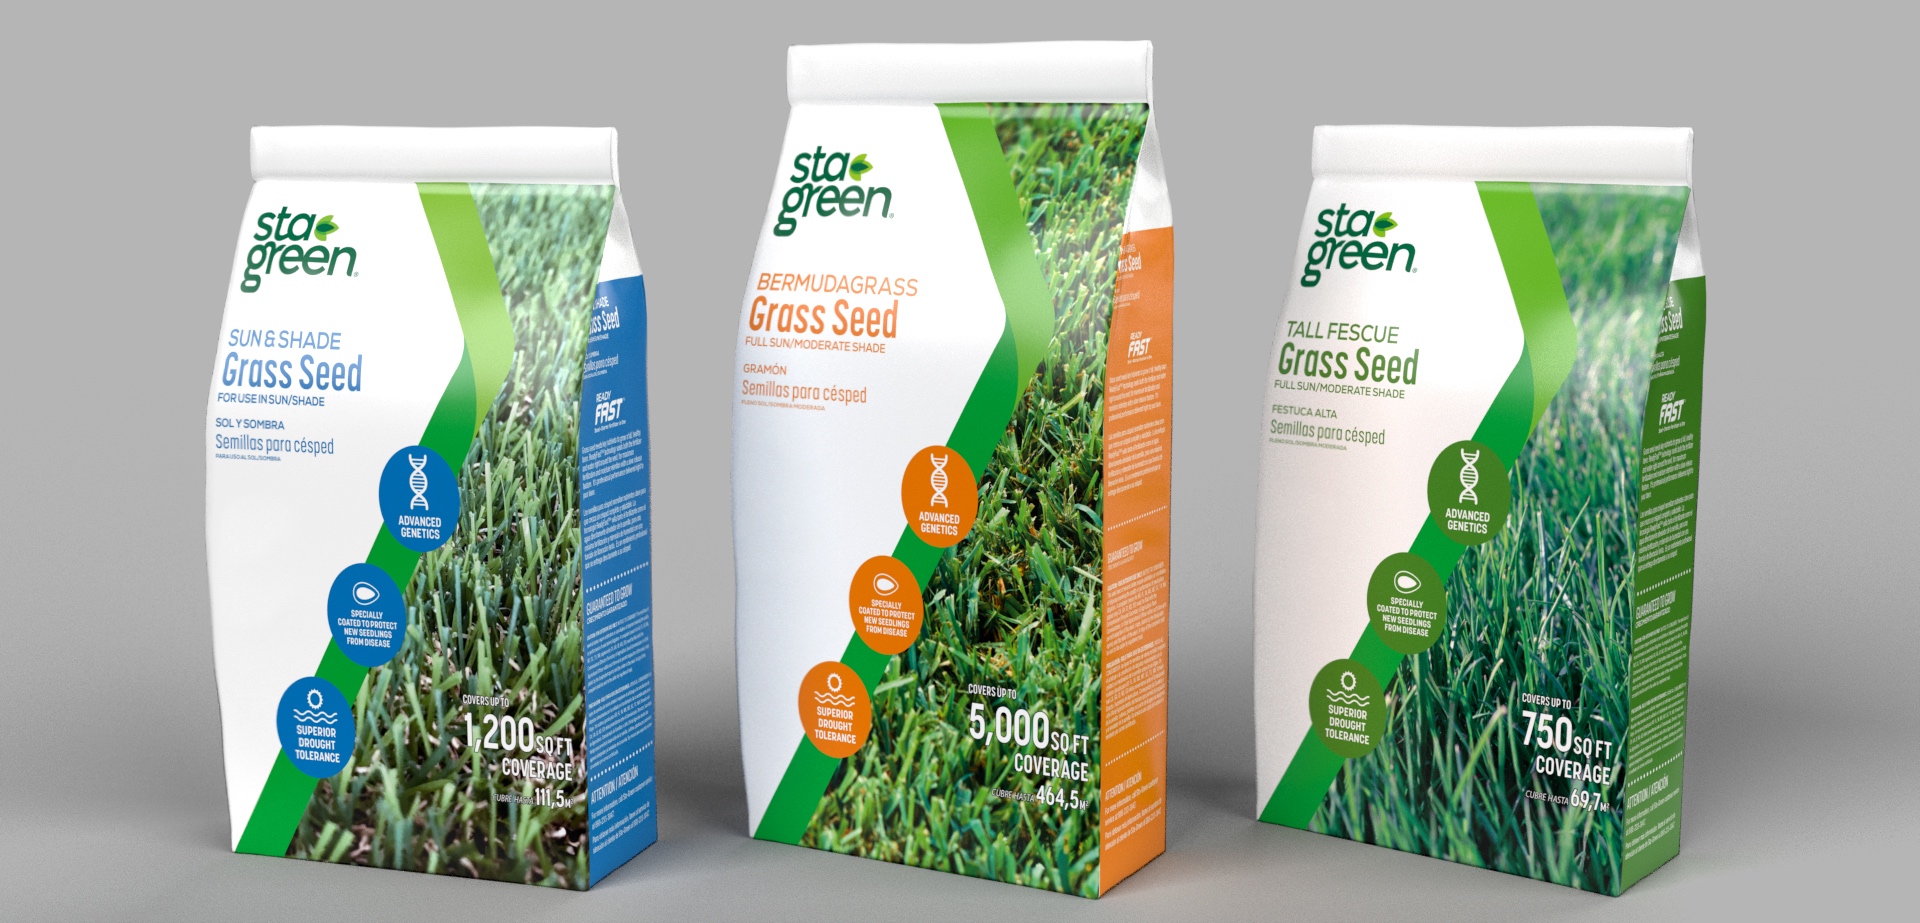 Lowe’s Sta-Green Packaging Redesign